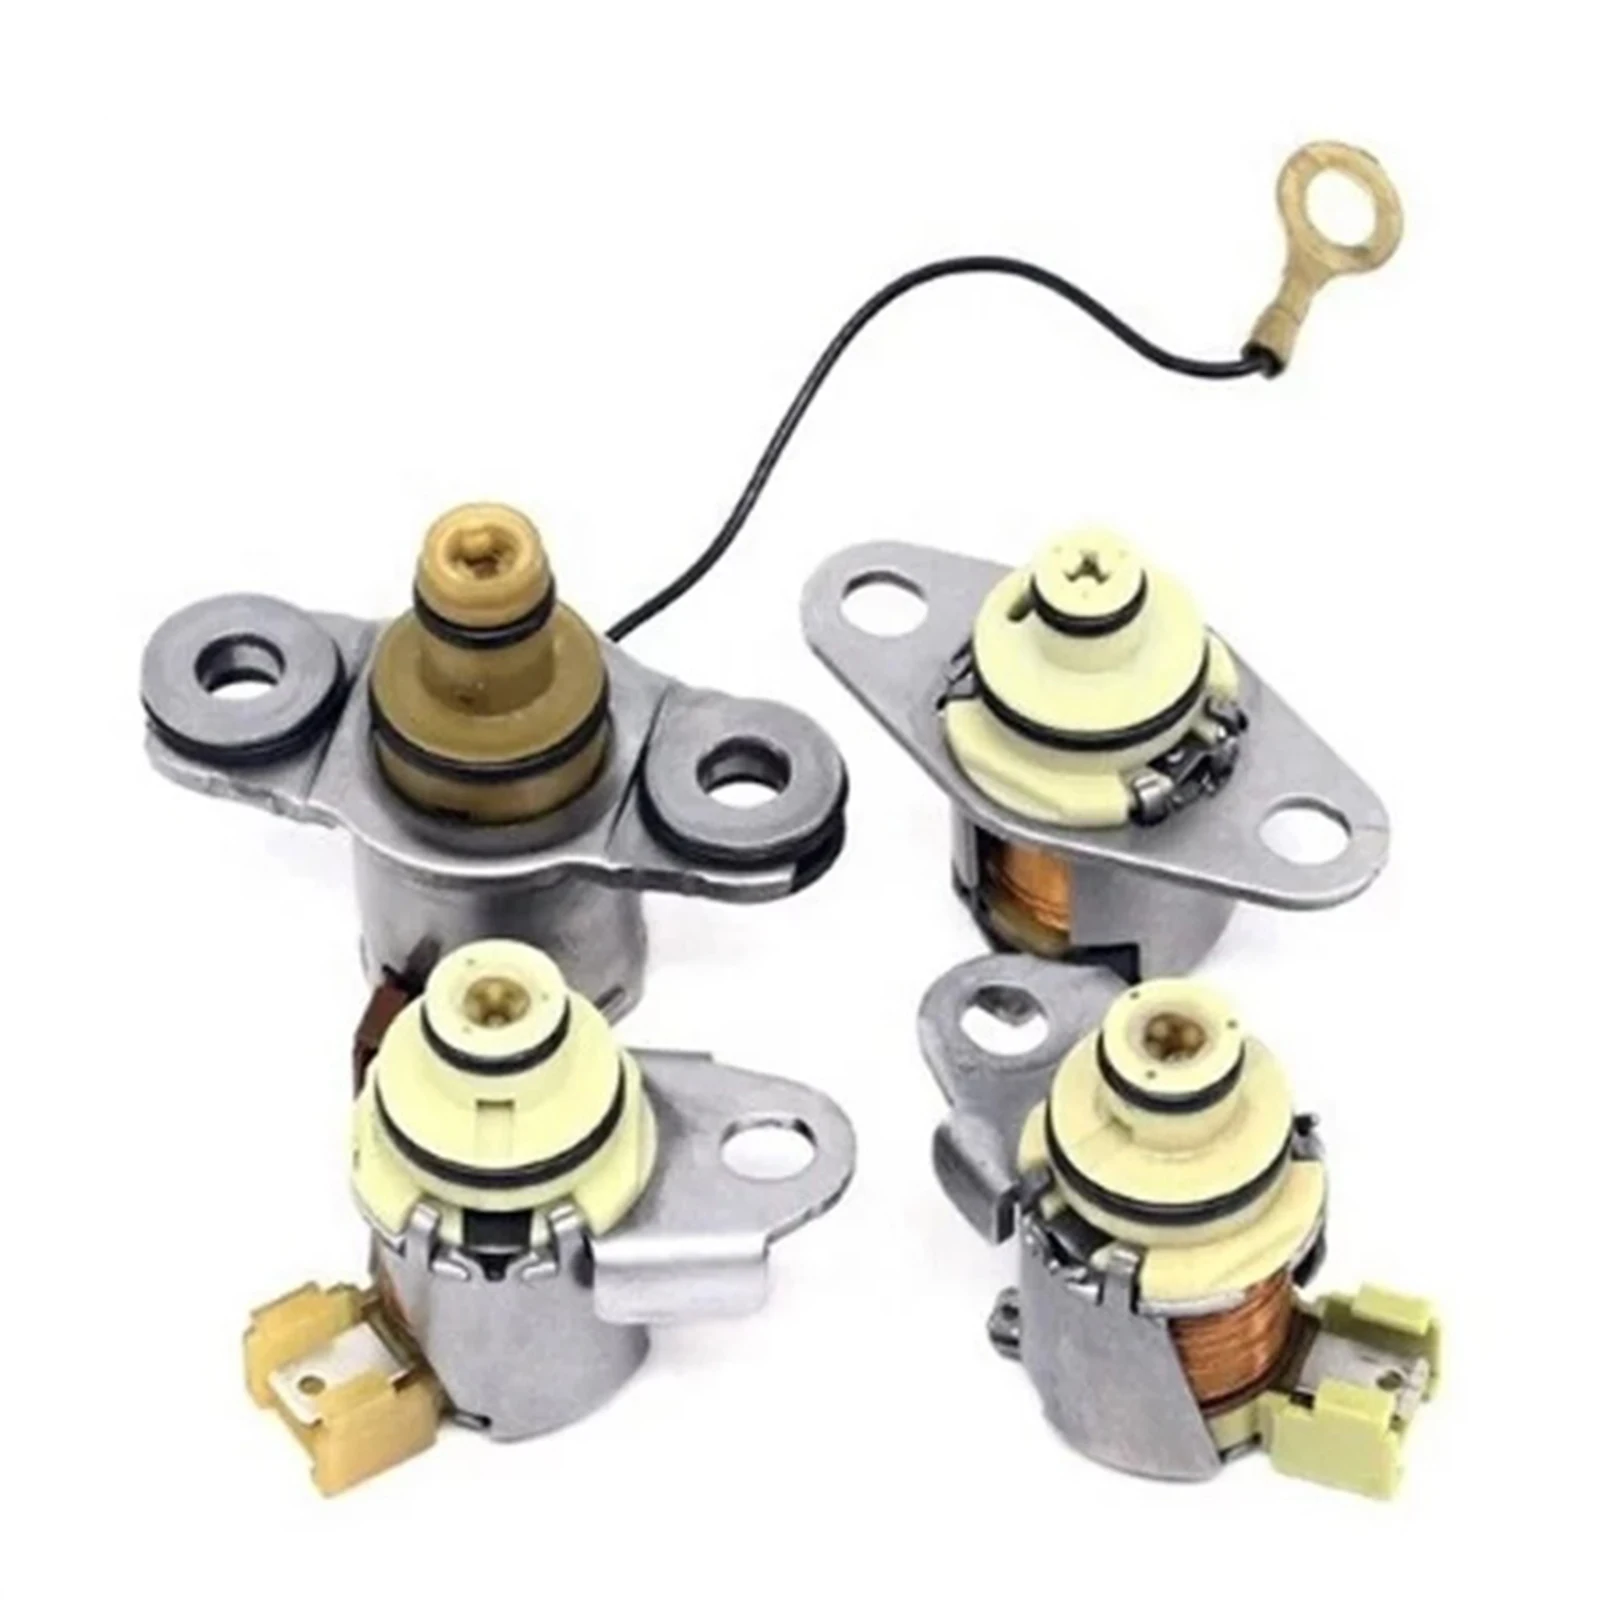 4x JF402E JF405E G6T46571 45663-02700 Transmiion Solenoids, Replacement Acceories Supplies for Chevolet Series